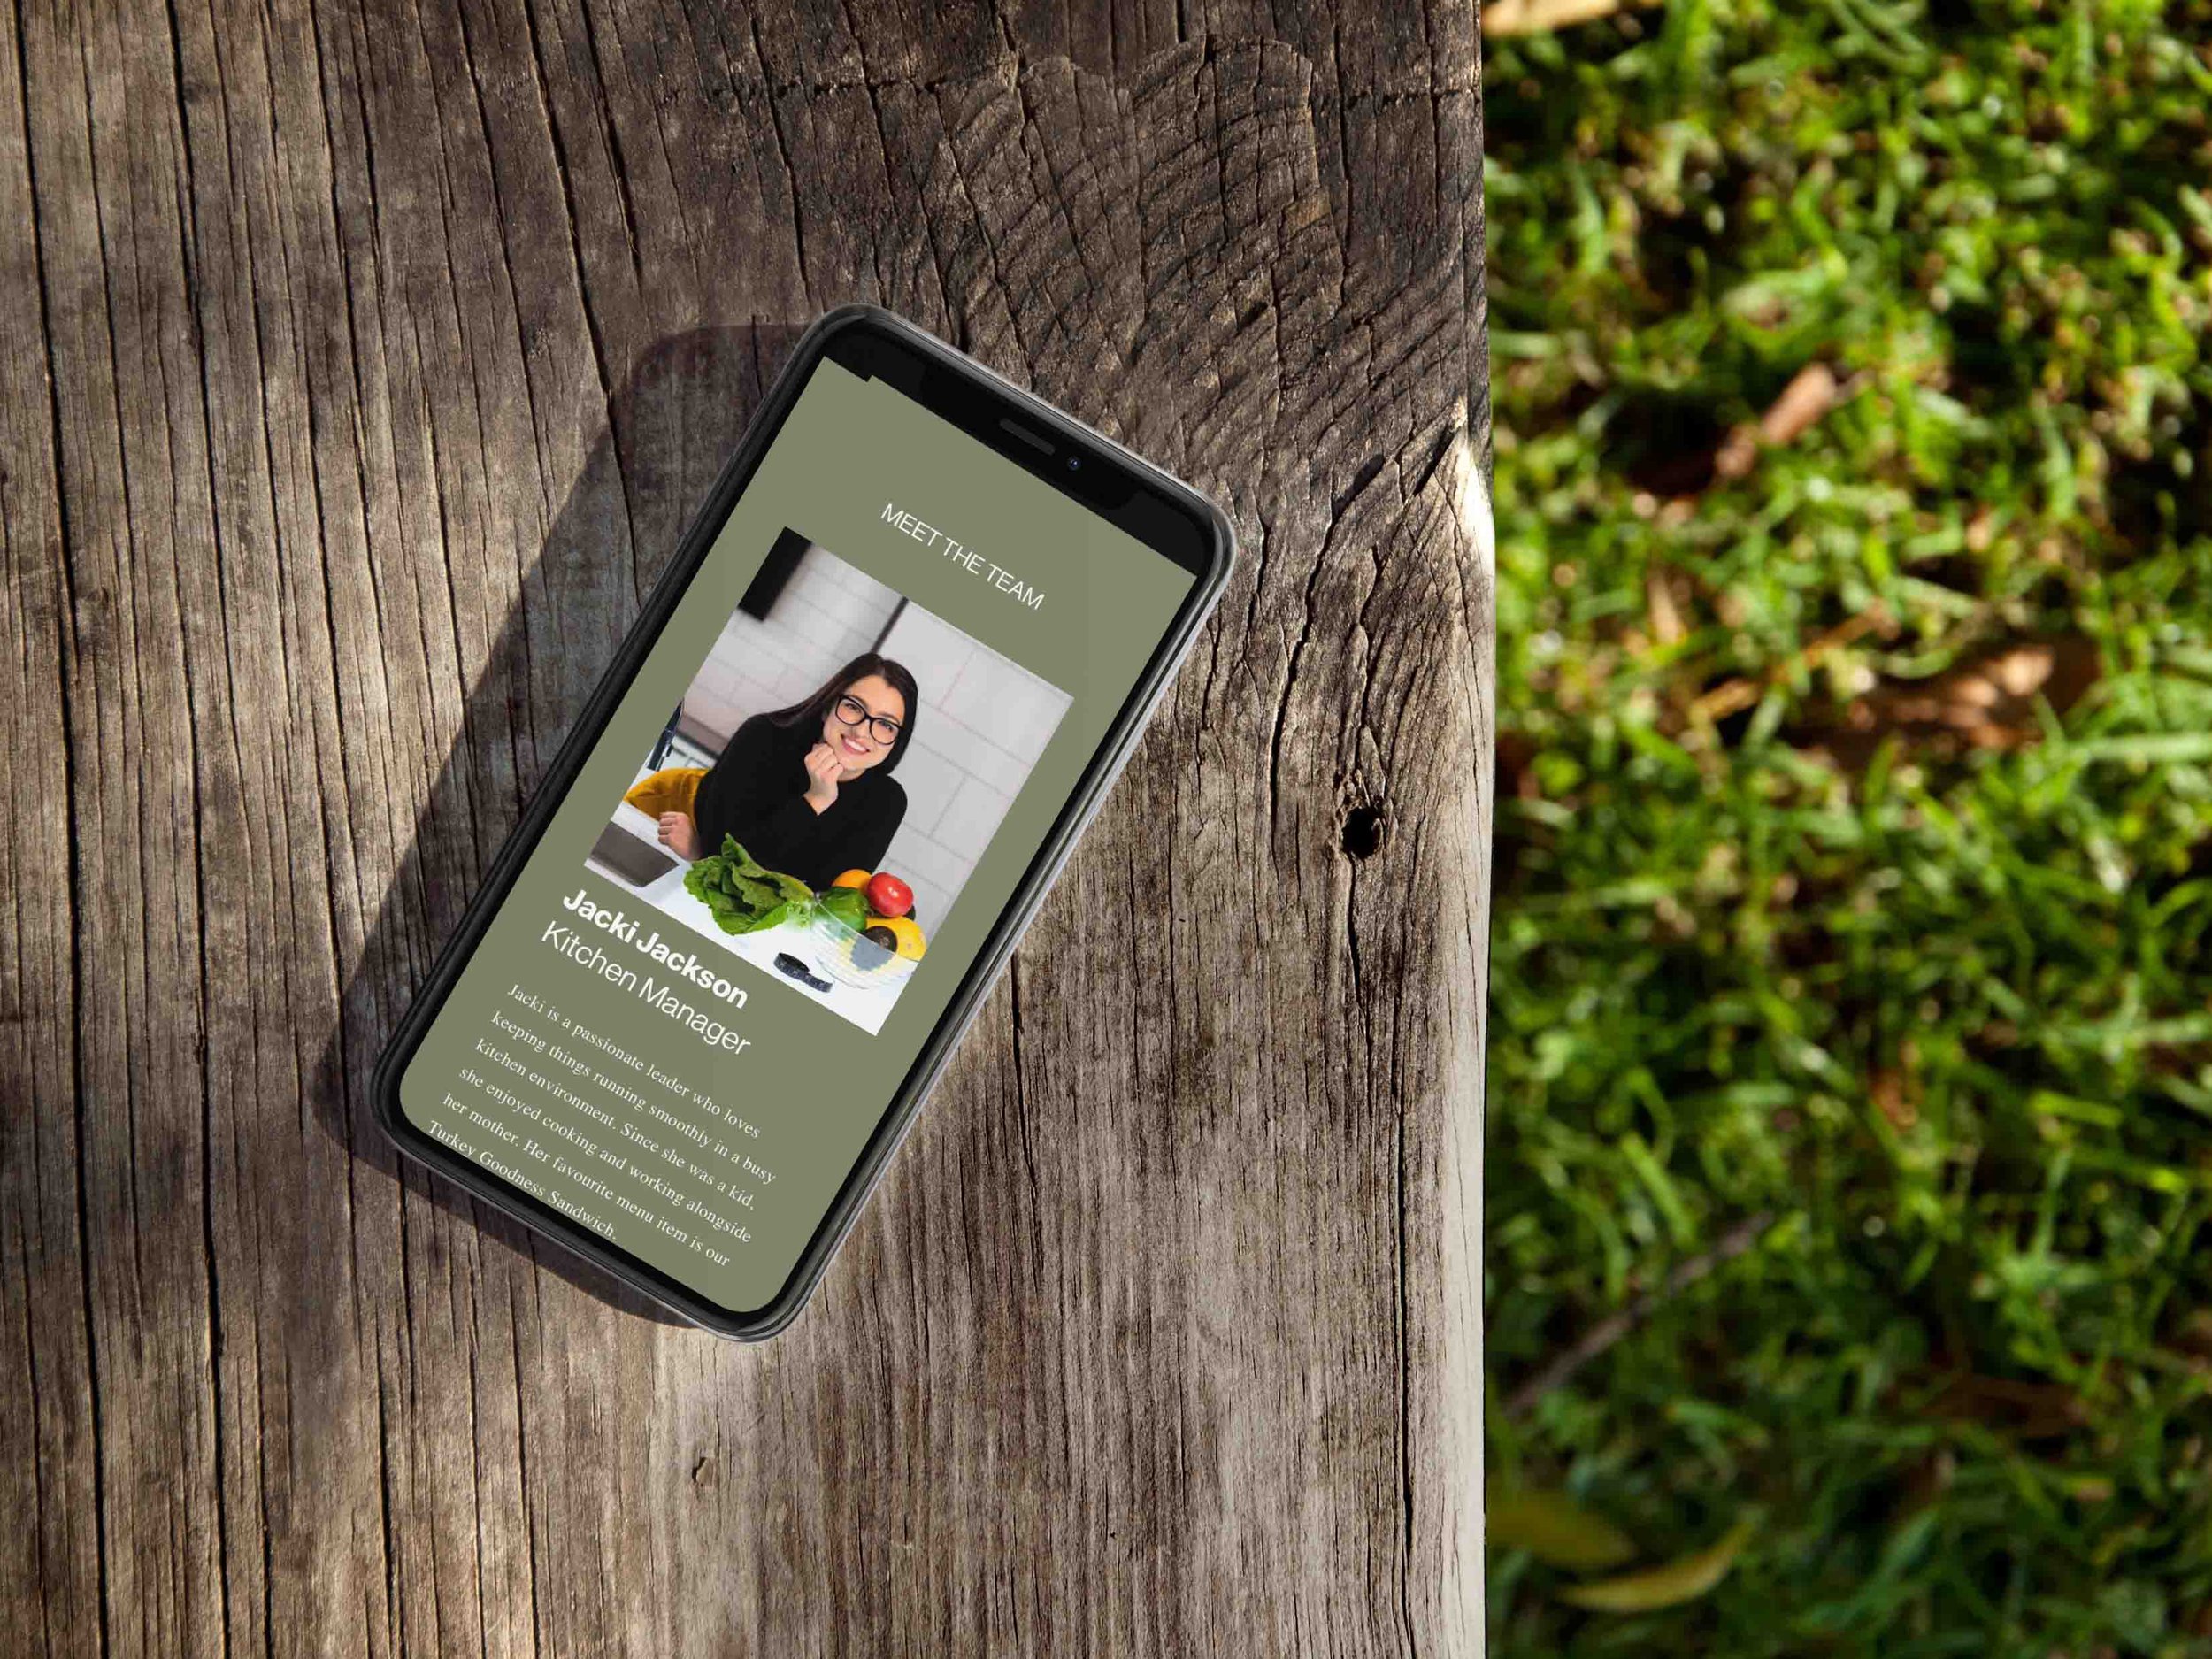 iphone-showing-restaurant-website-lying-on-a-wooden-bench-outdoors.jpg